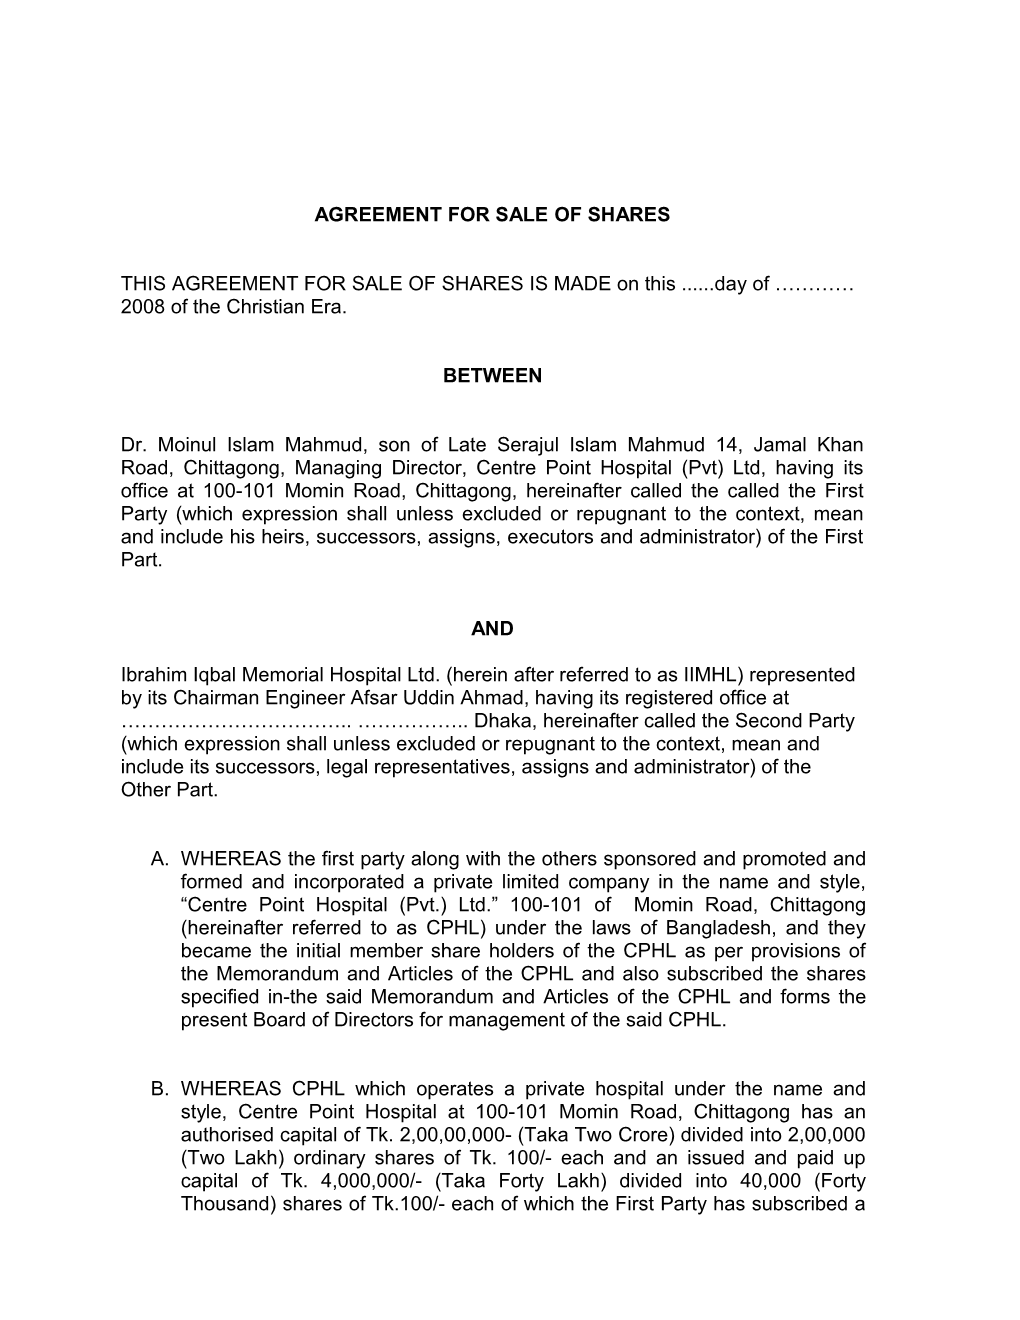 Agreement for Transfer of Shares